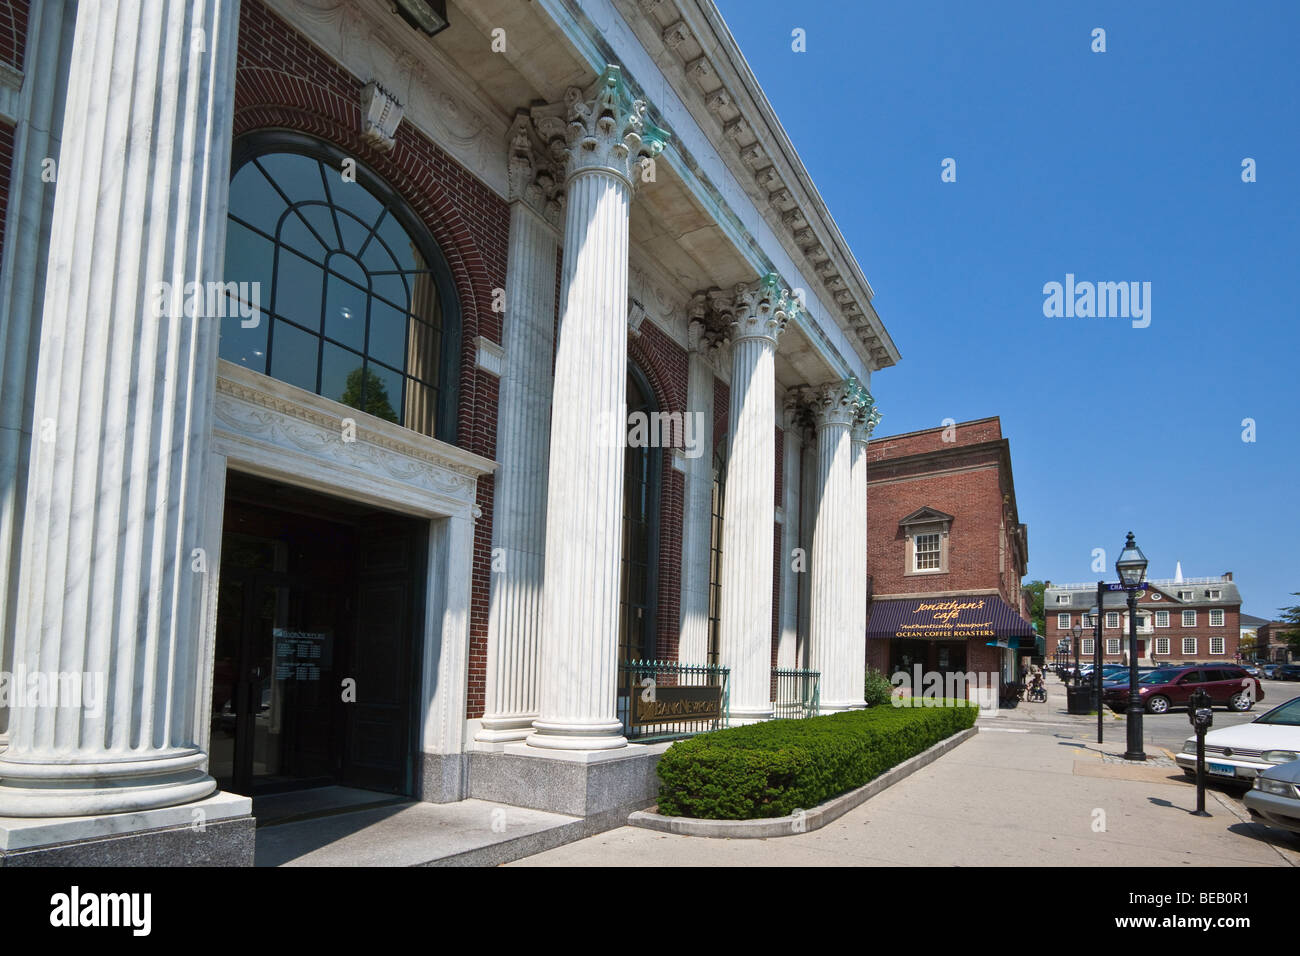 Fluted columns and facade of the BankNewport building on Washington Square in historic Newport, Rhode Island, New England, USA Stock Photo